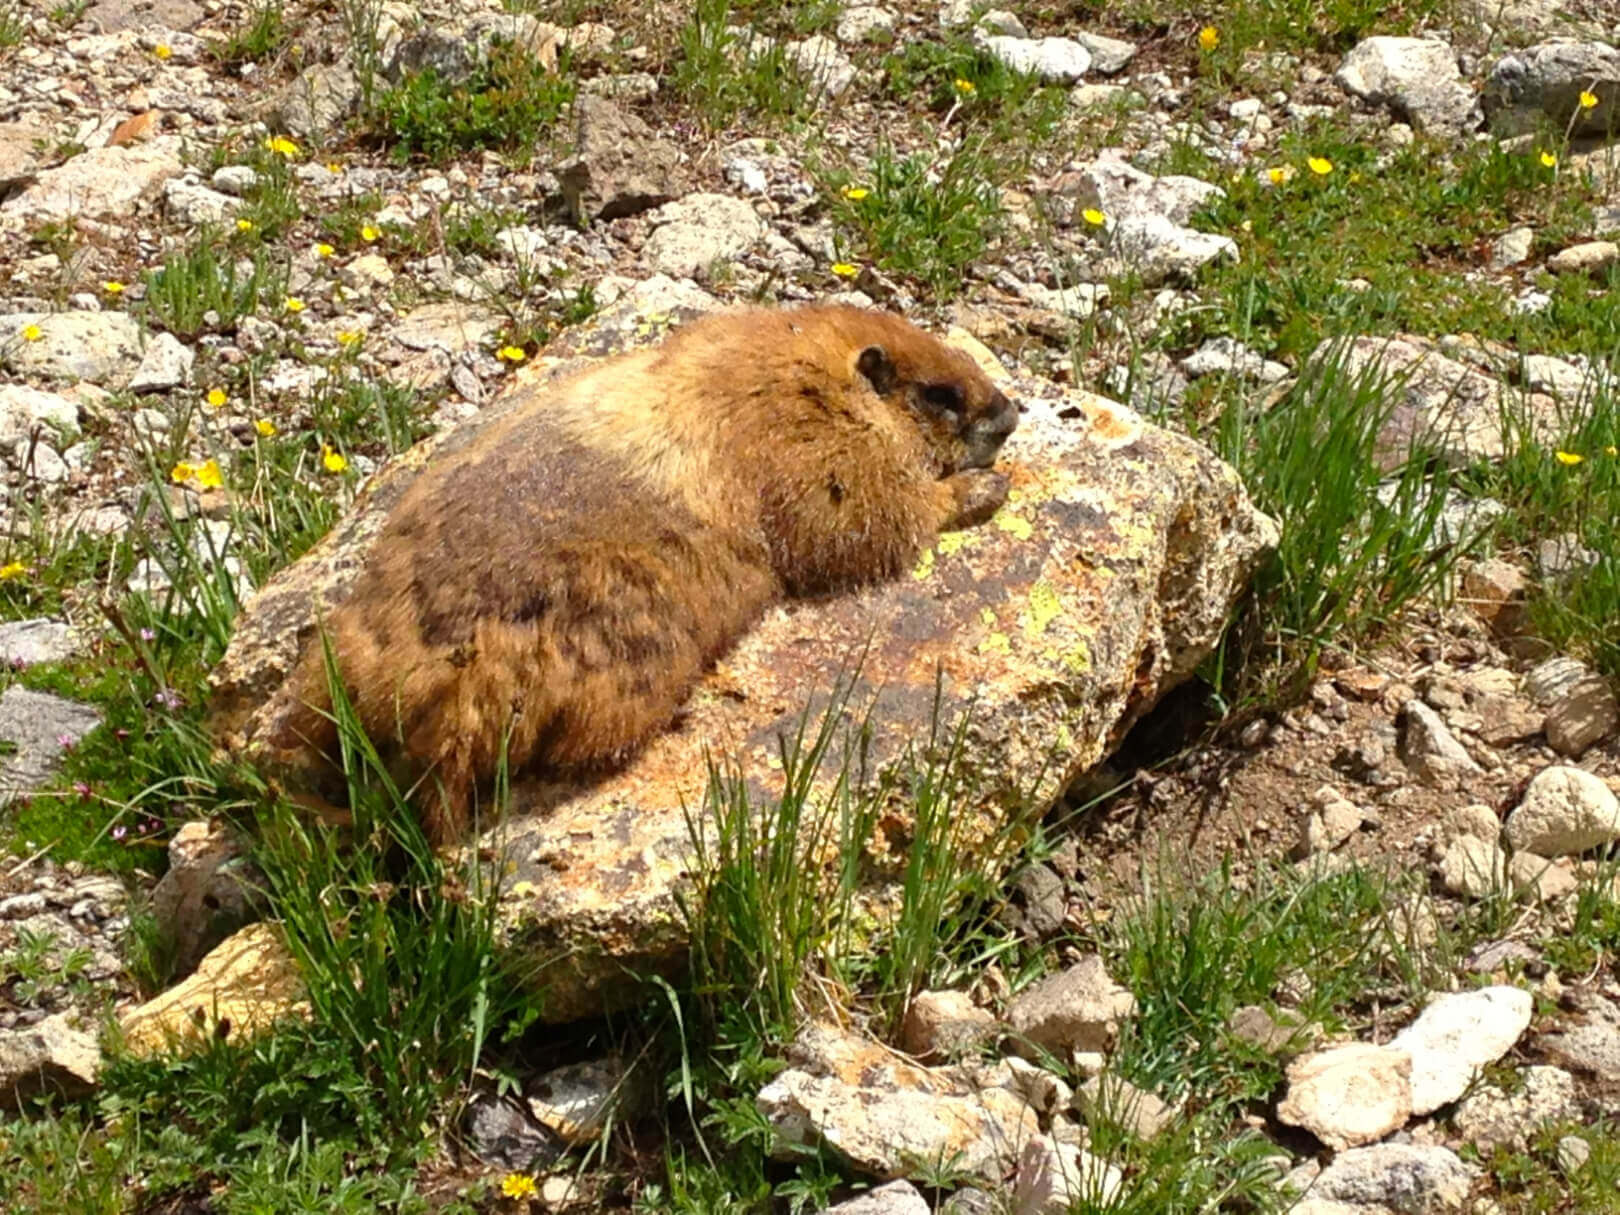 An animal sitting on a rock in a filed